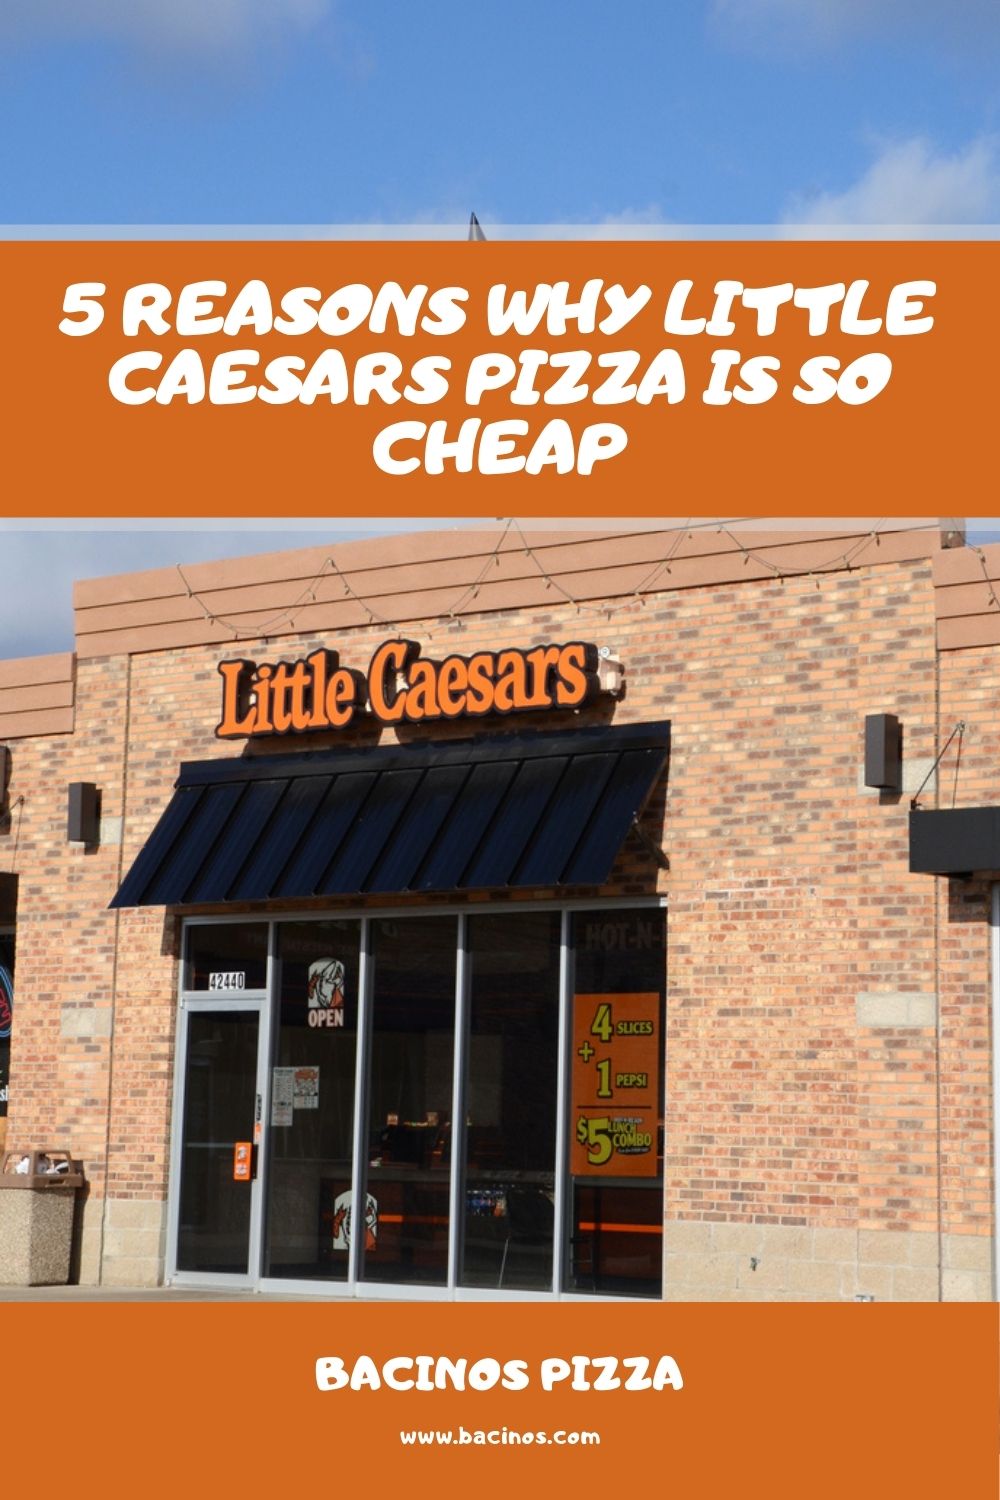 5 Reasons Why Little Caesars Pizza is So Cheap 1